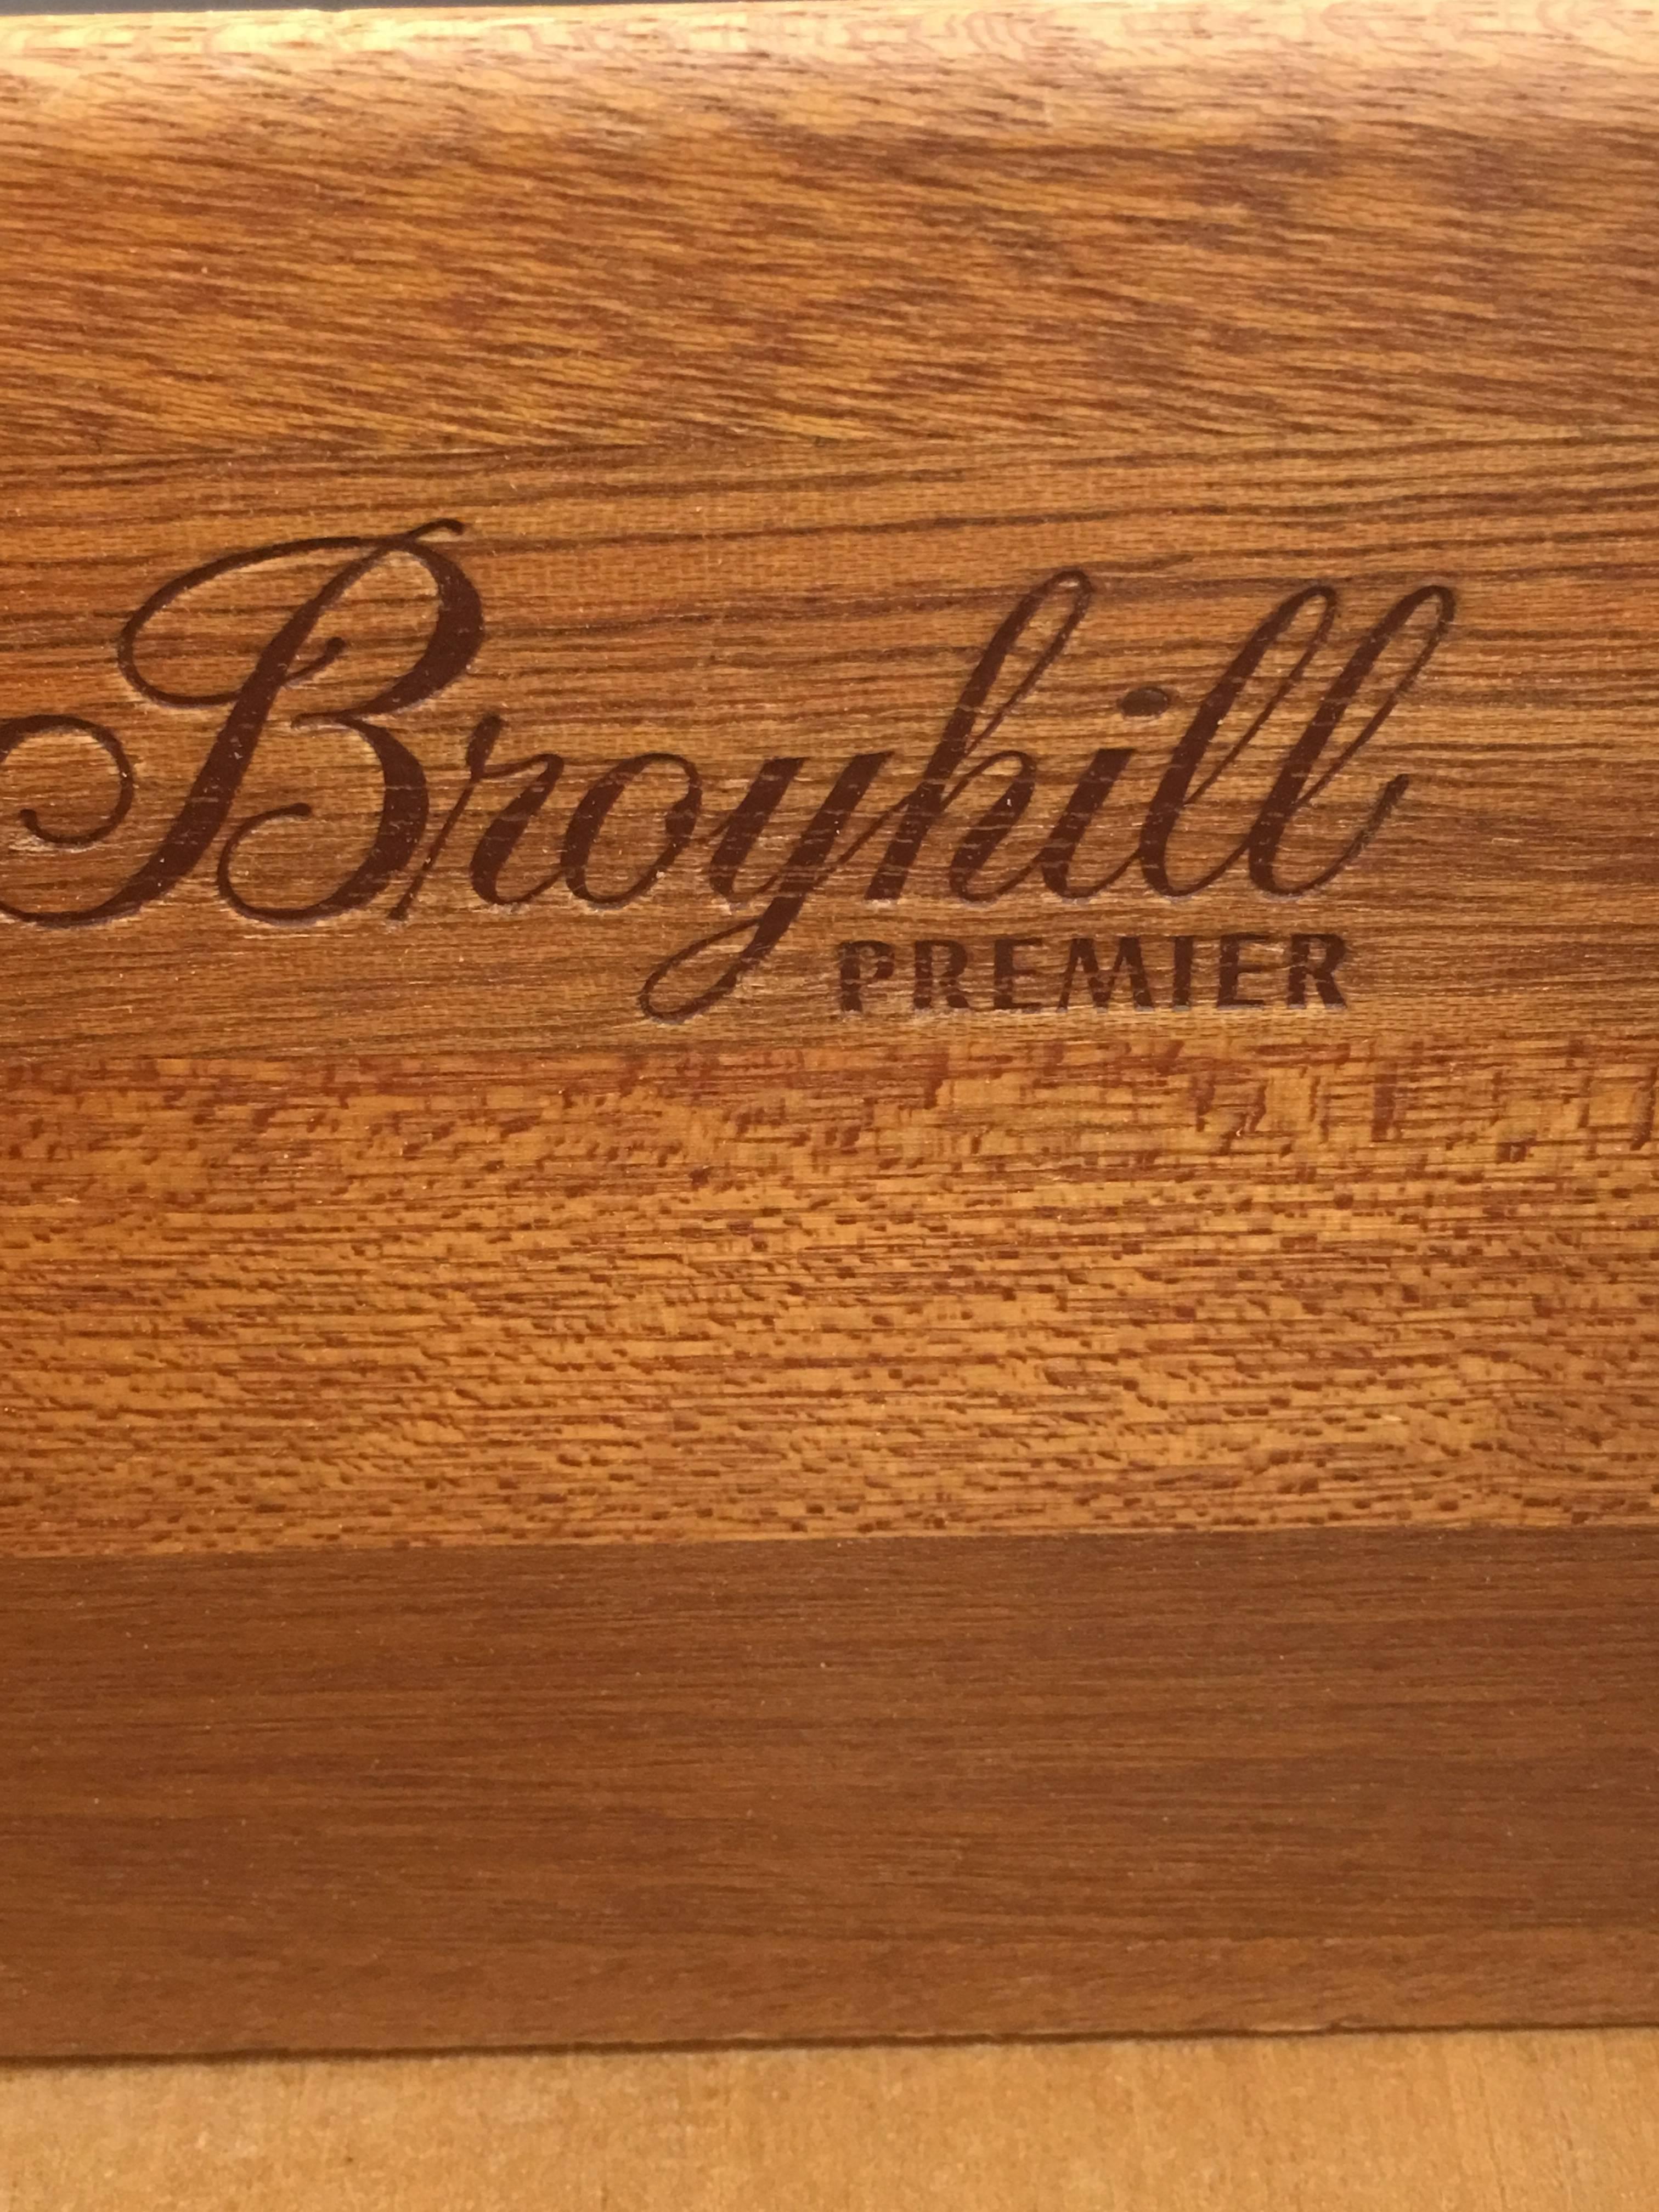 Modernist Chrome and Walnut Cabinet by Broyhill Premier 3